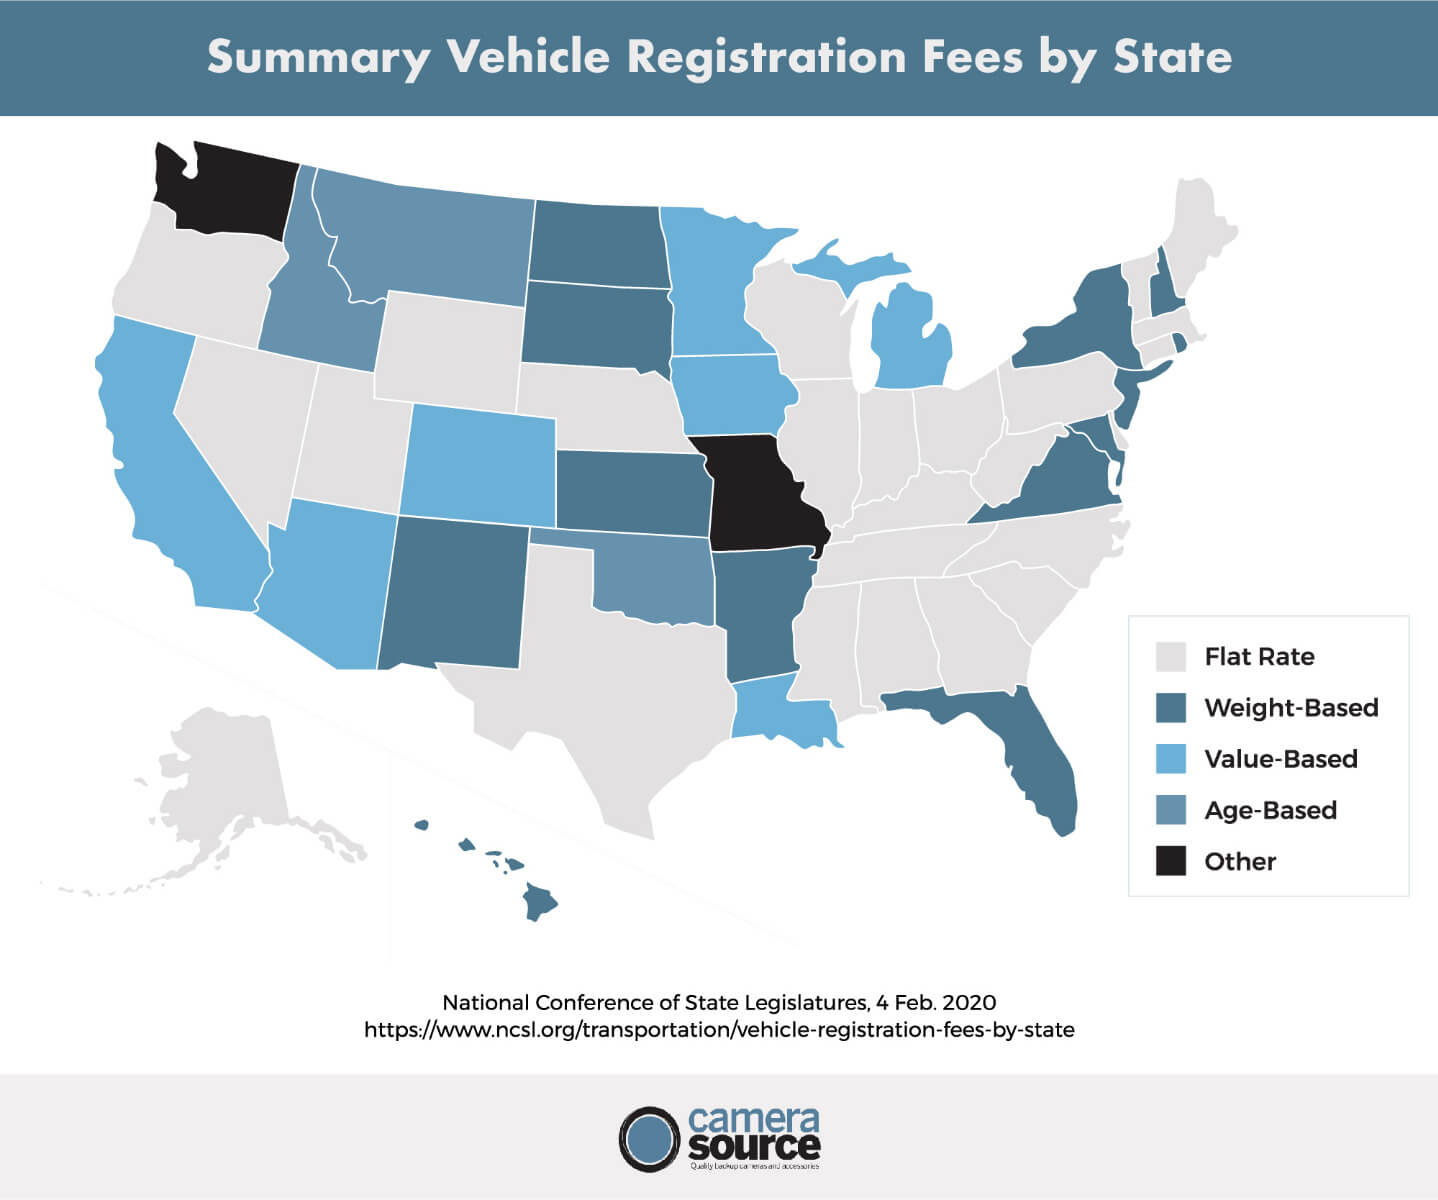 Types of Registration Fees per State